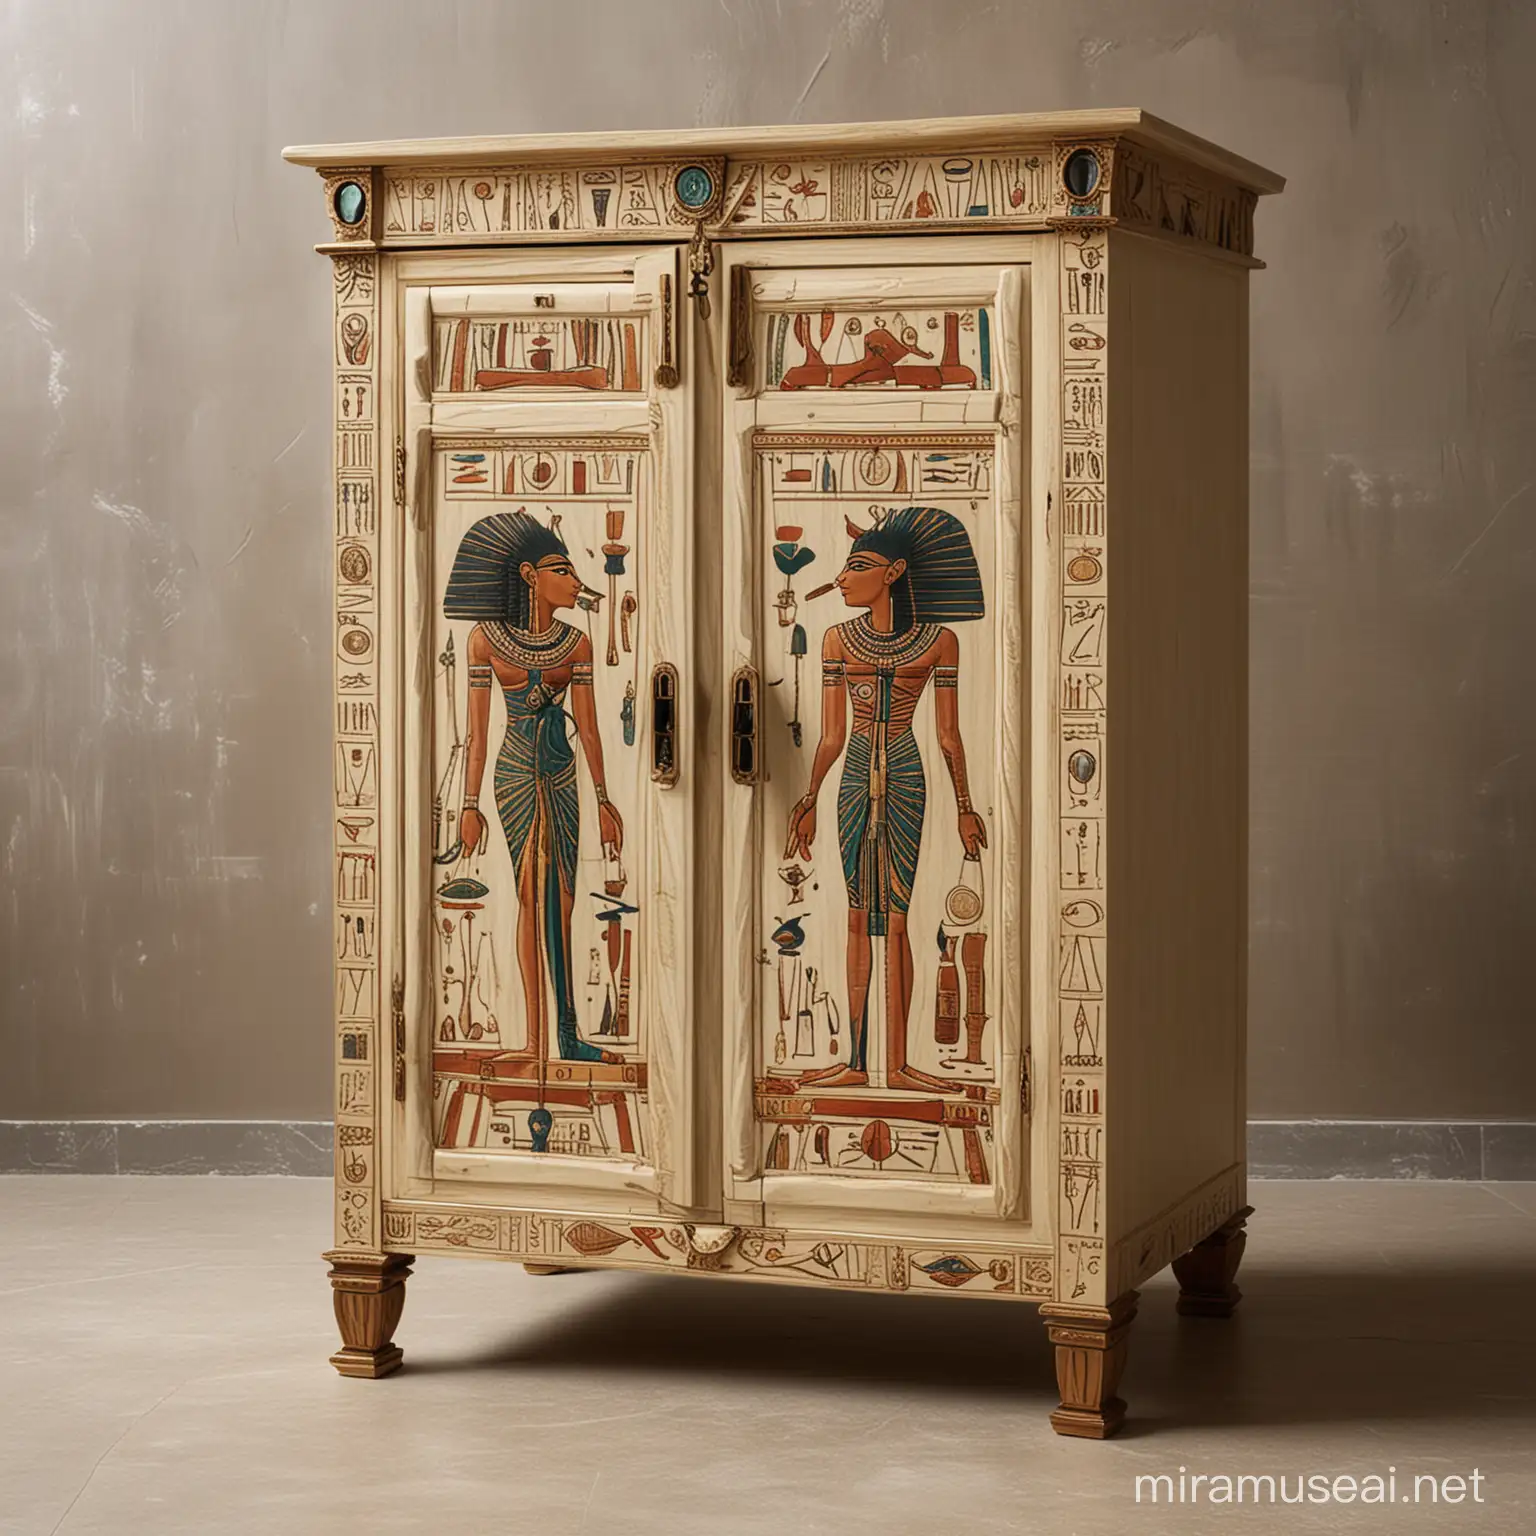 
A cupboard inspired by ancient Egyptian Pharaonic furniture, with legs in the shape of the key of life and handles as well